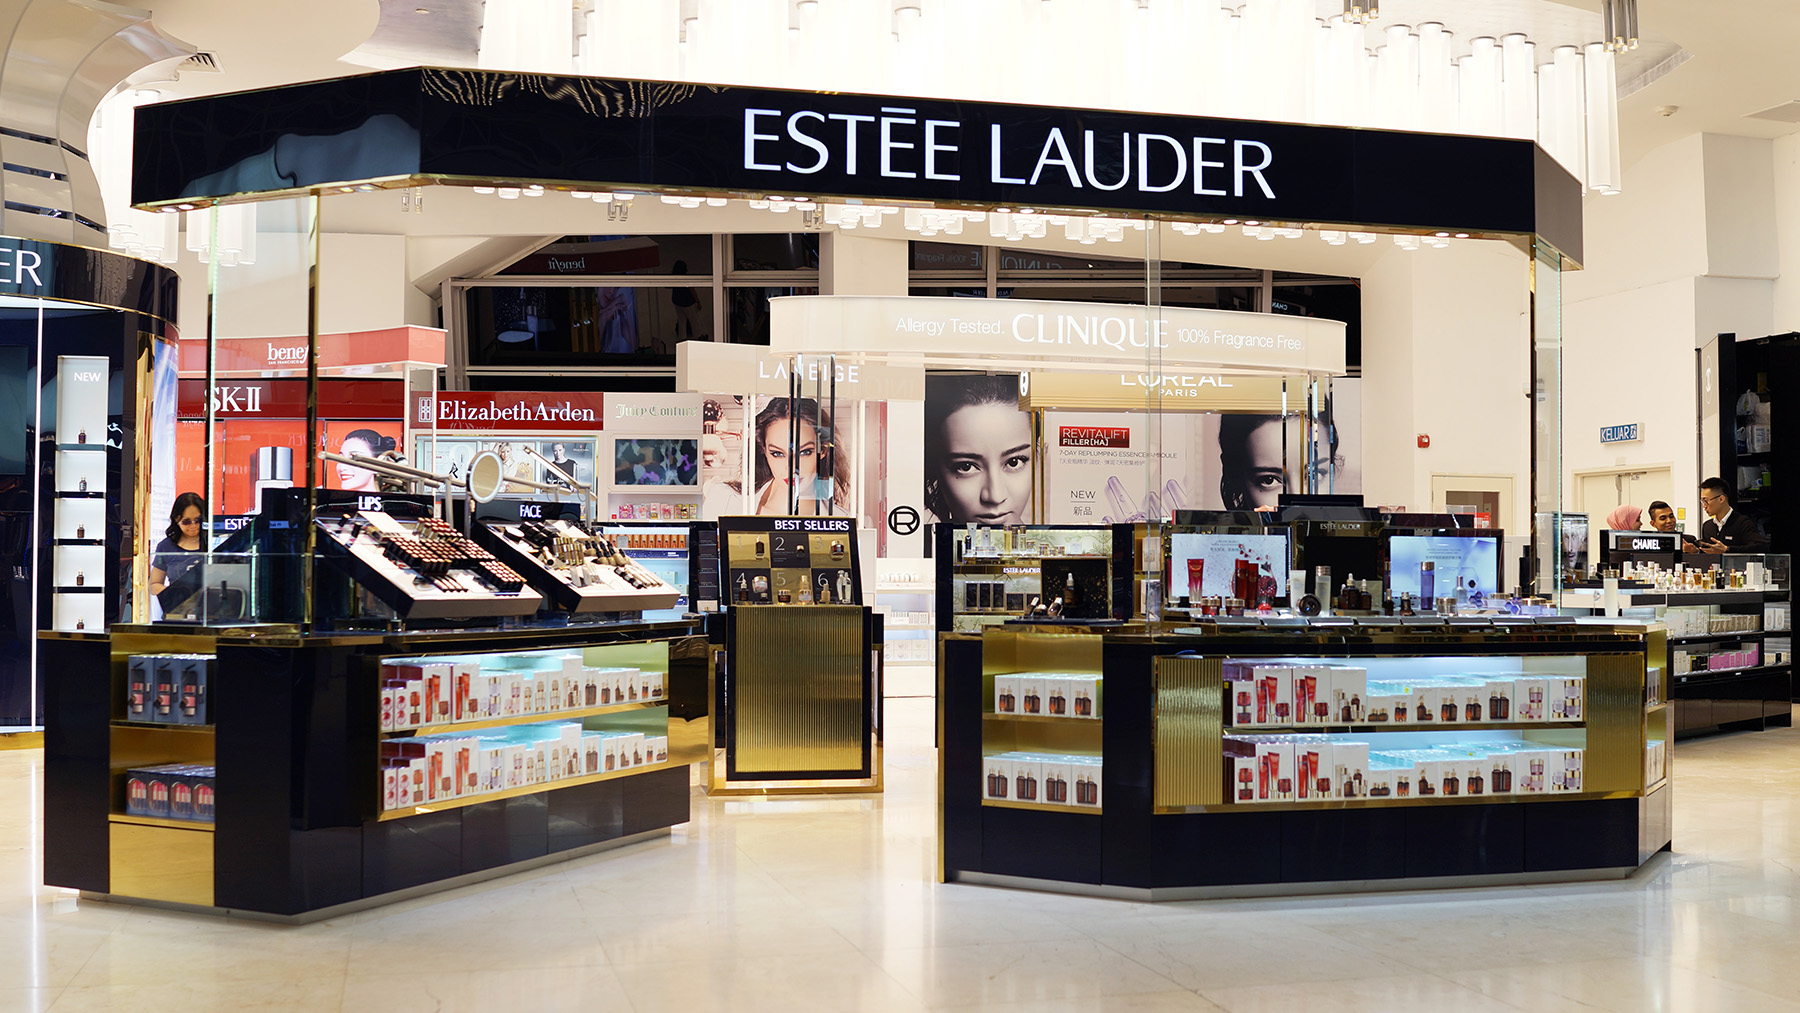 Strong demand for makeup drives Estee Lauder's glossy sales forecast